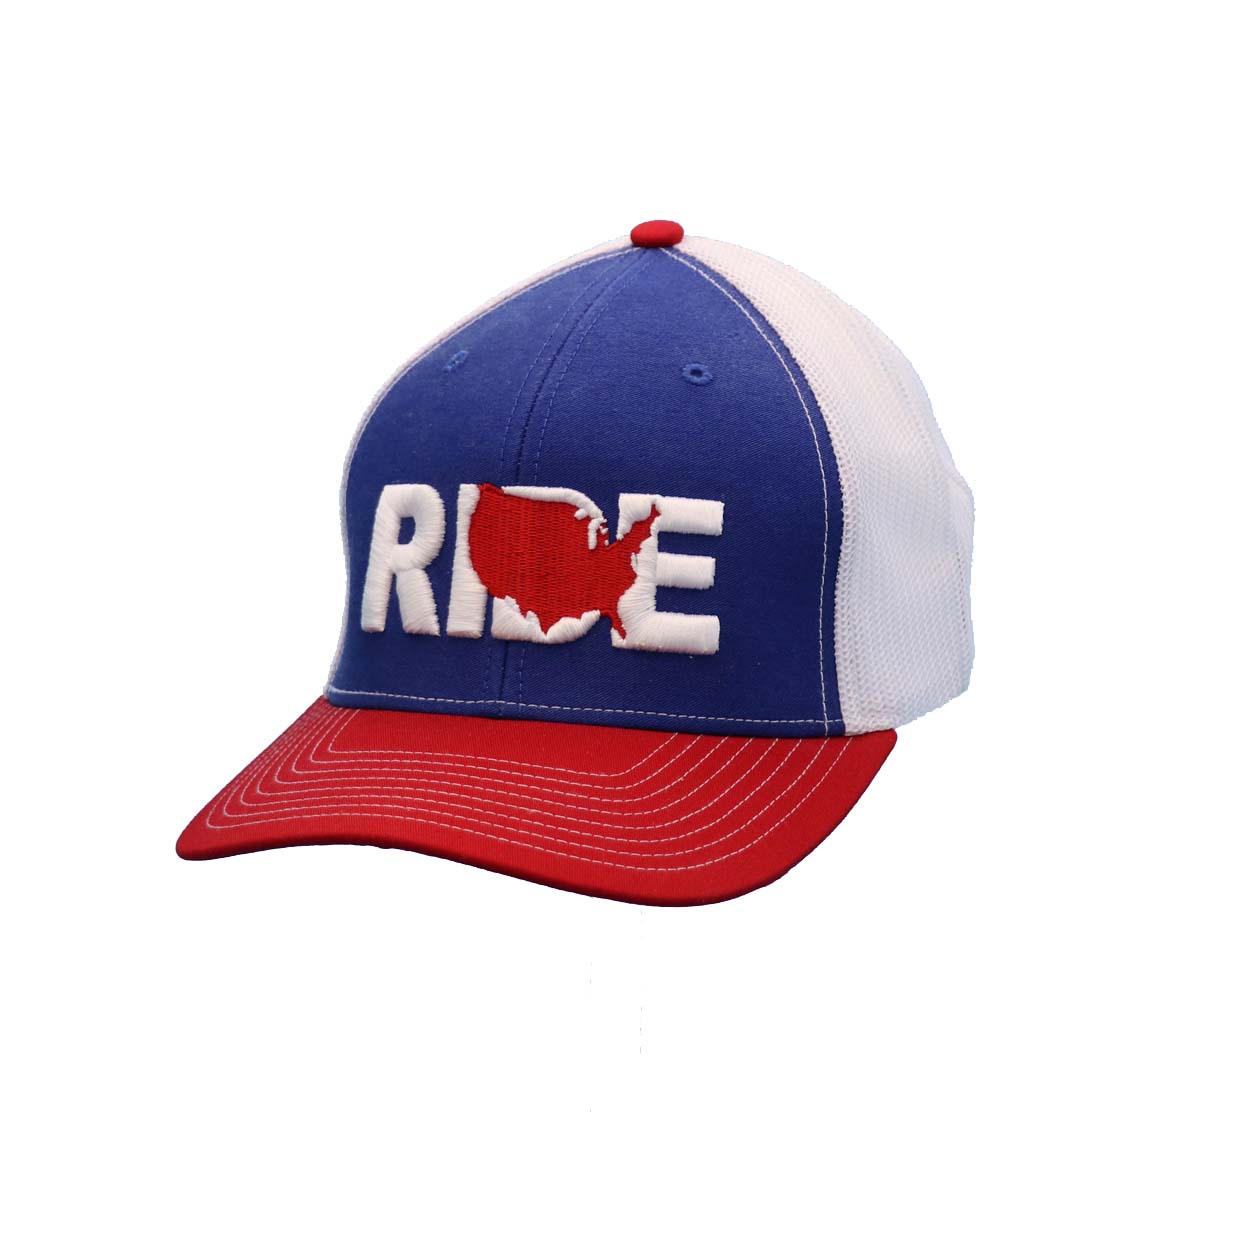 Ride United States Classic Pro 3D Puff Embroidered Snapback Trucker Hat Blue/White/Red